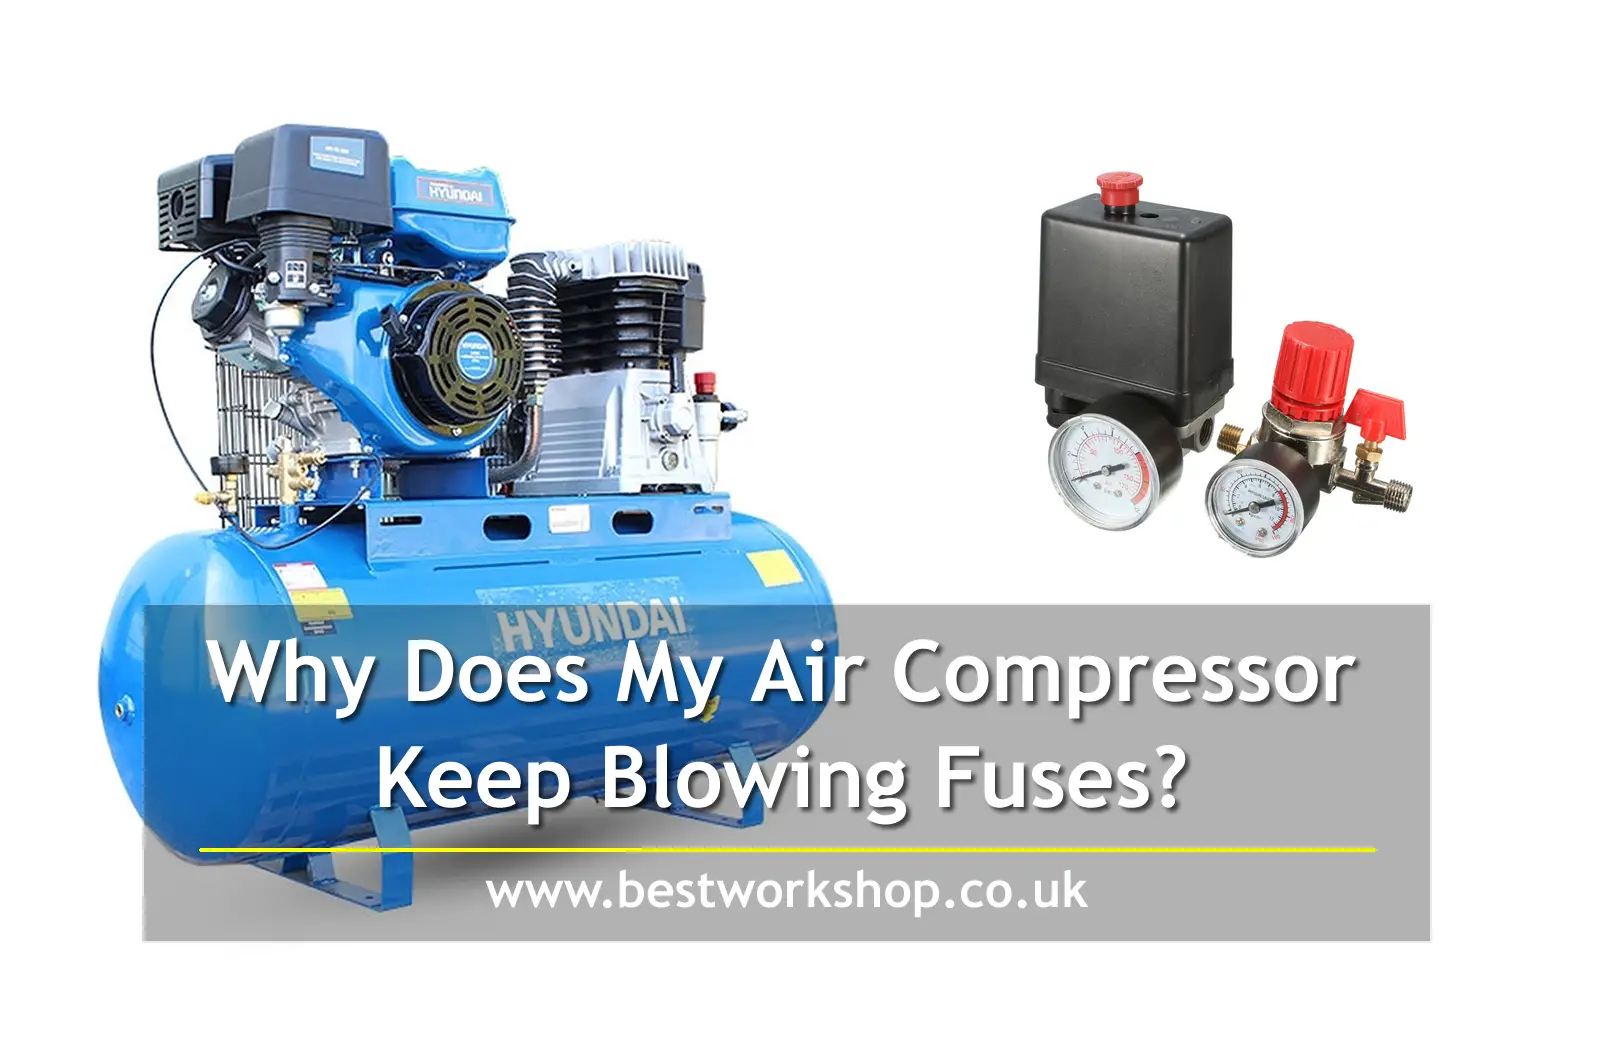 Why Does My Air Compressor Keep Blowing Fuses?